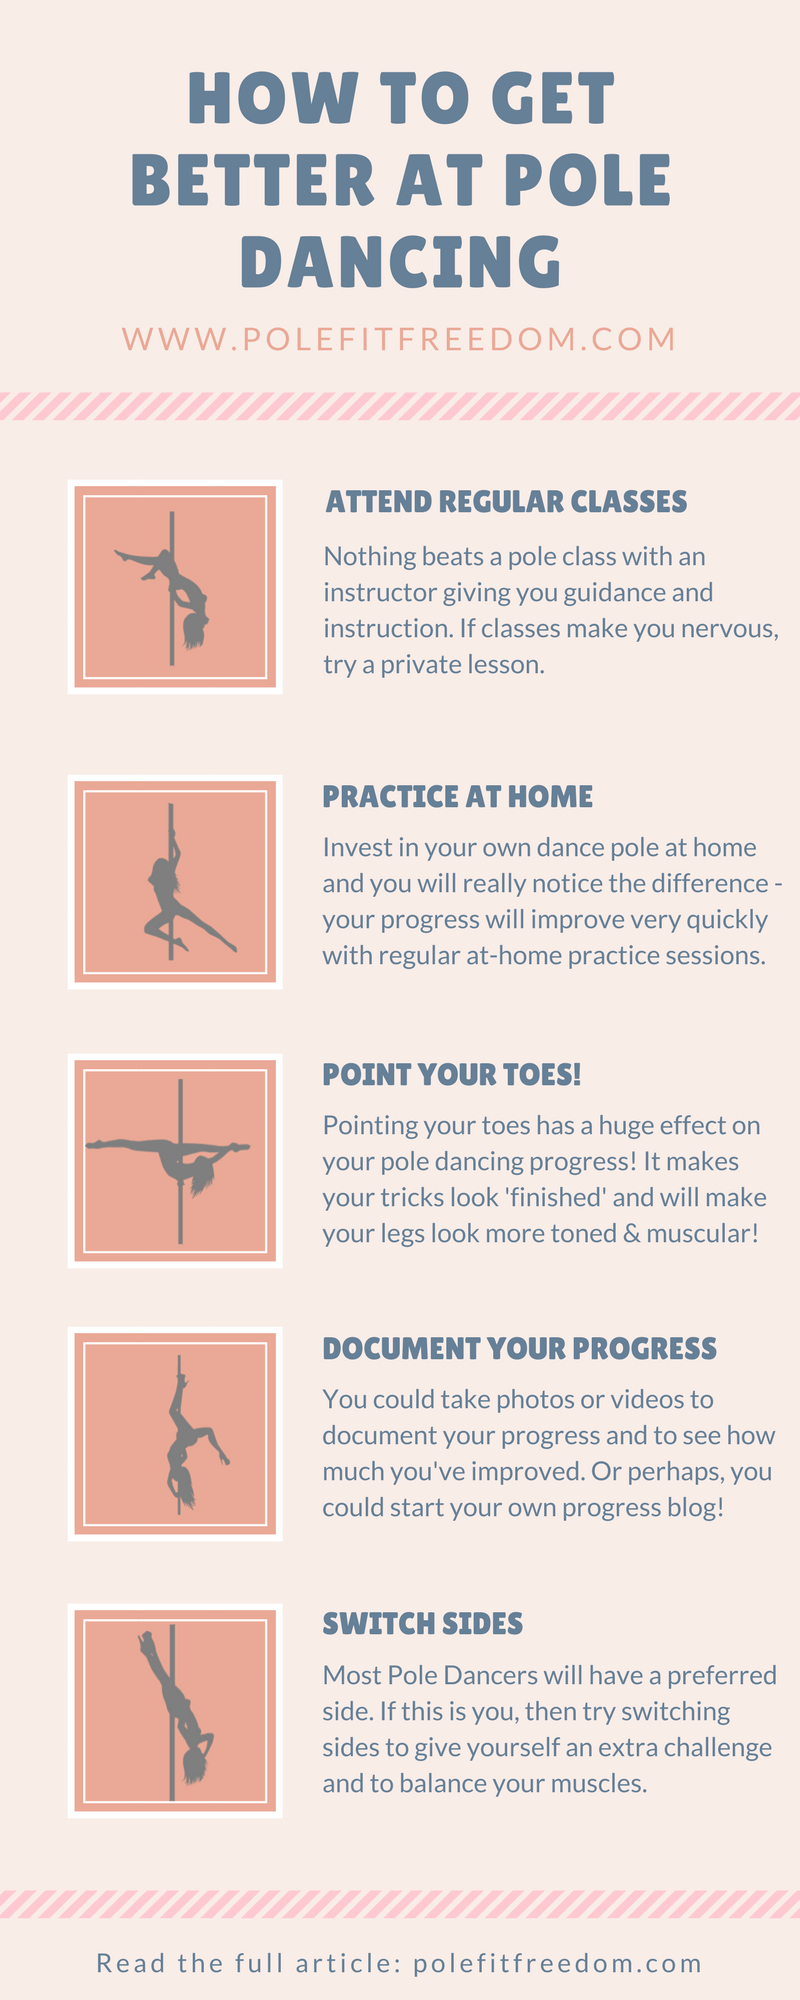 How to get better at pole dancing infographic 